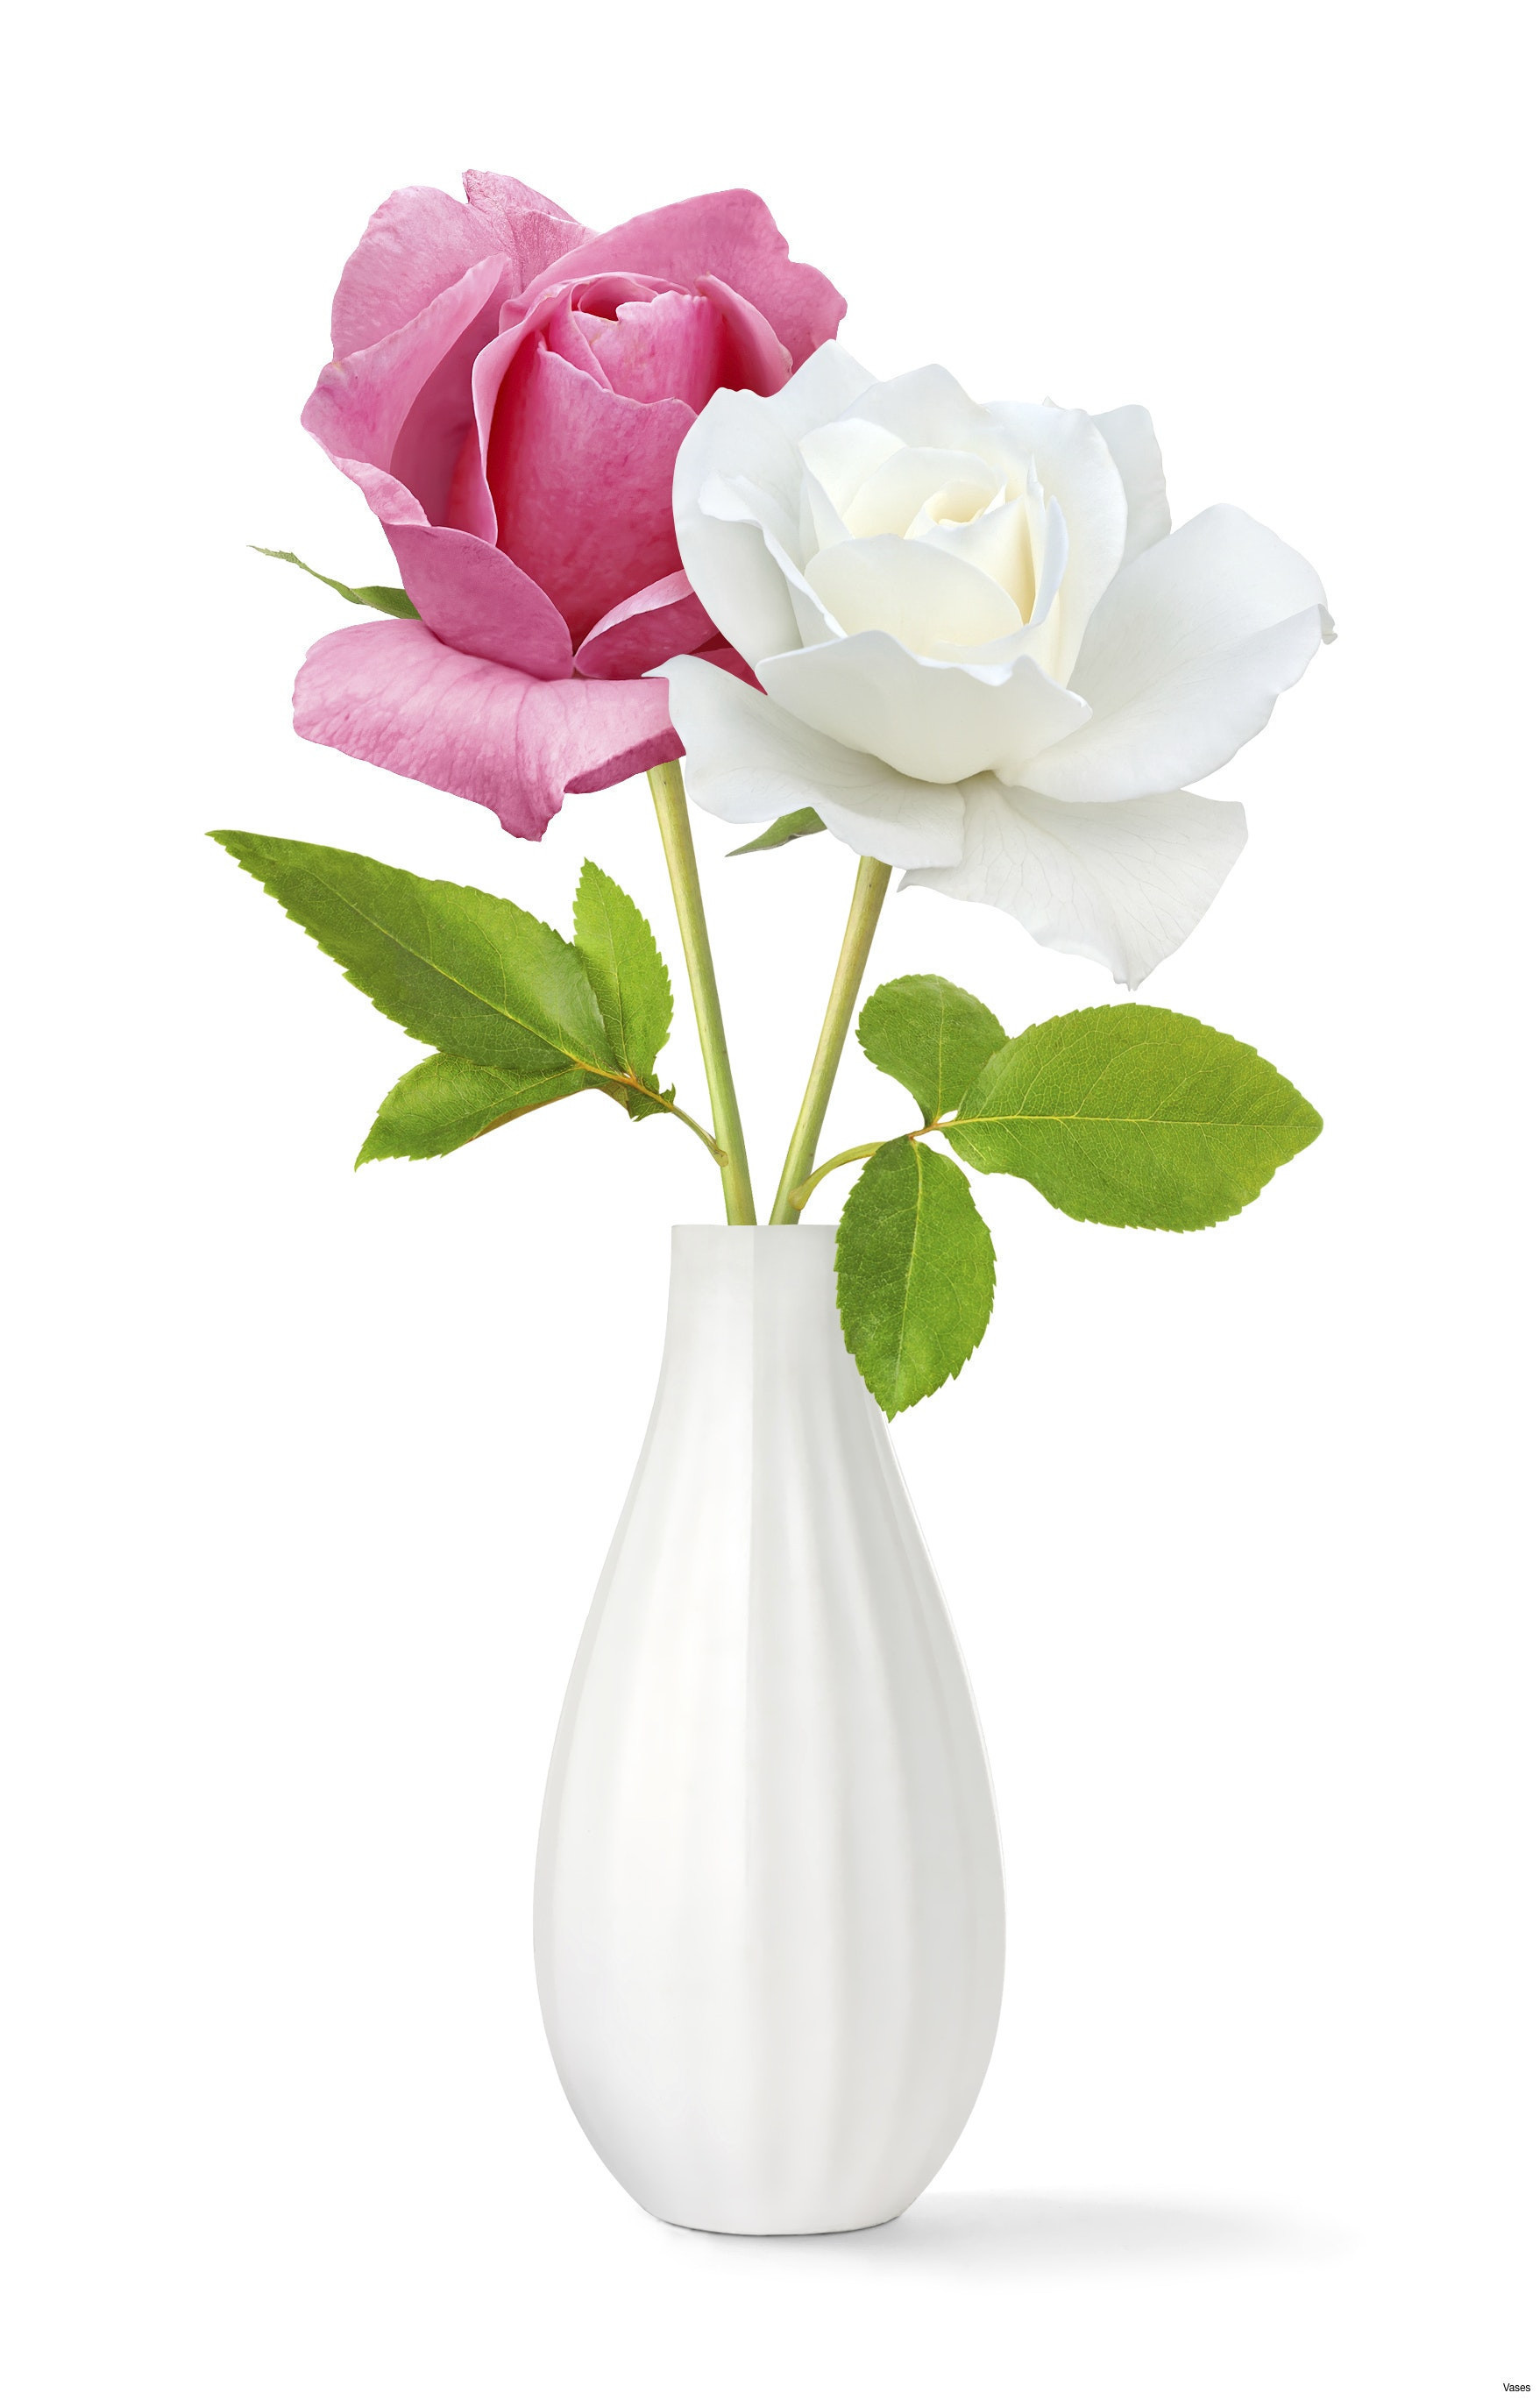 22 Spectacular Flowers with Free Delivery and Free Vase 2024 free download flowers with free delivery and free vase of single rose vases stock free shipping high quality clear glass vase with regard to single rose vases pics roses red in a vase singleh vases rose s